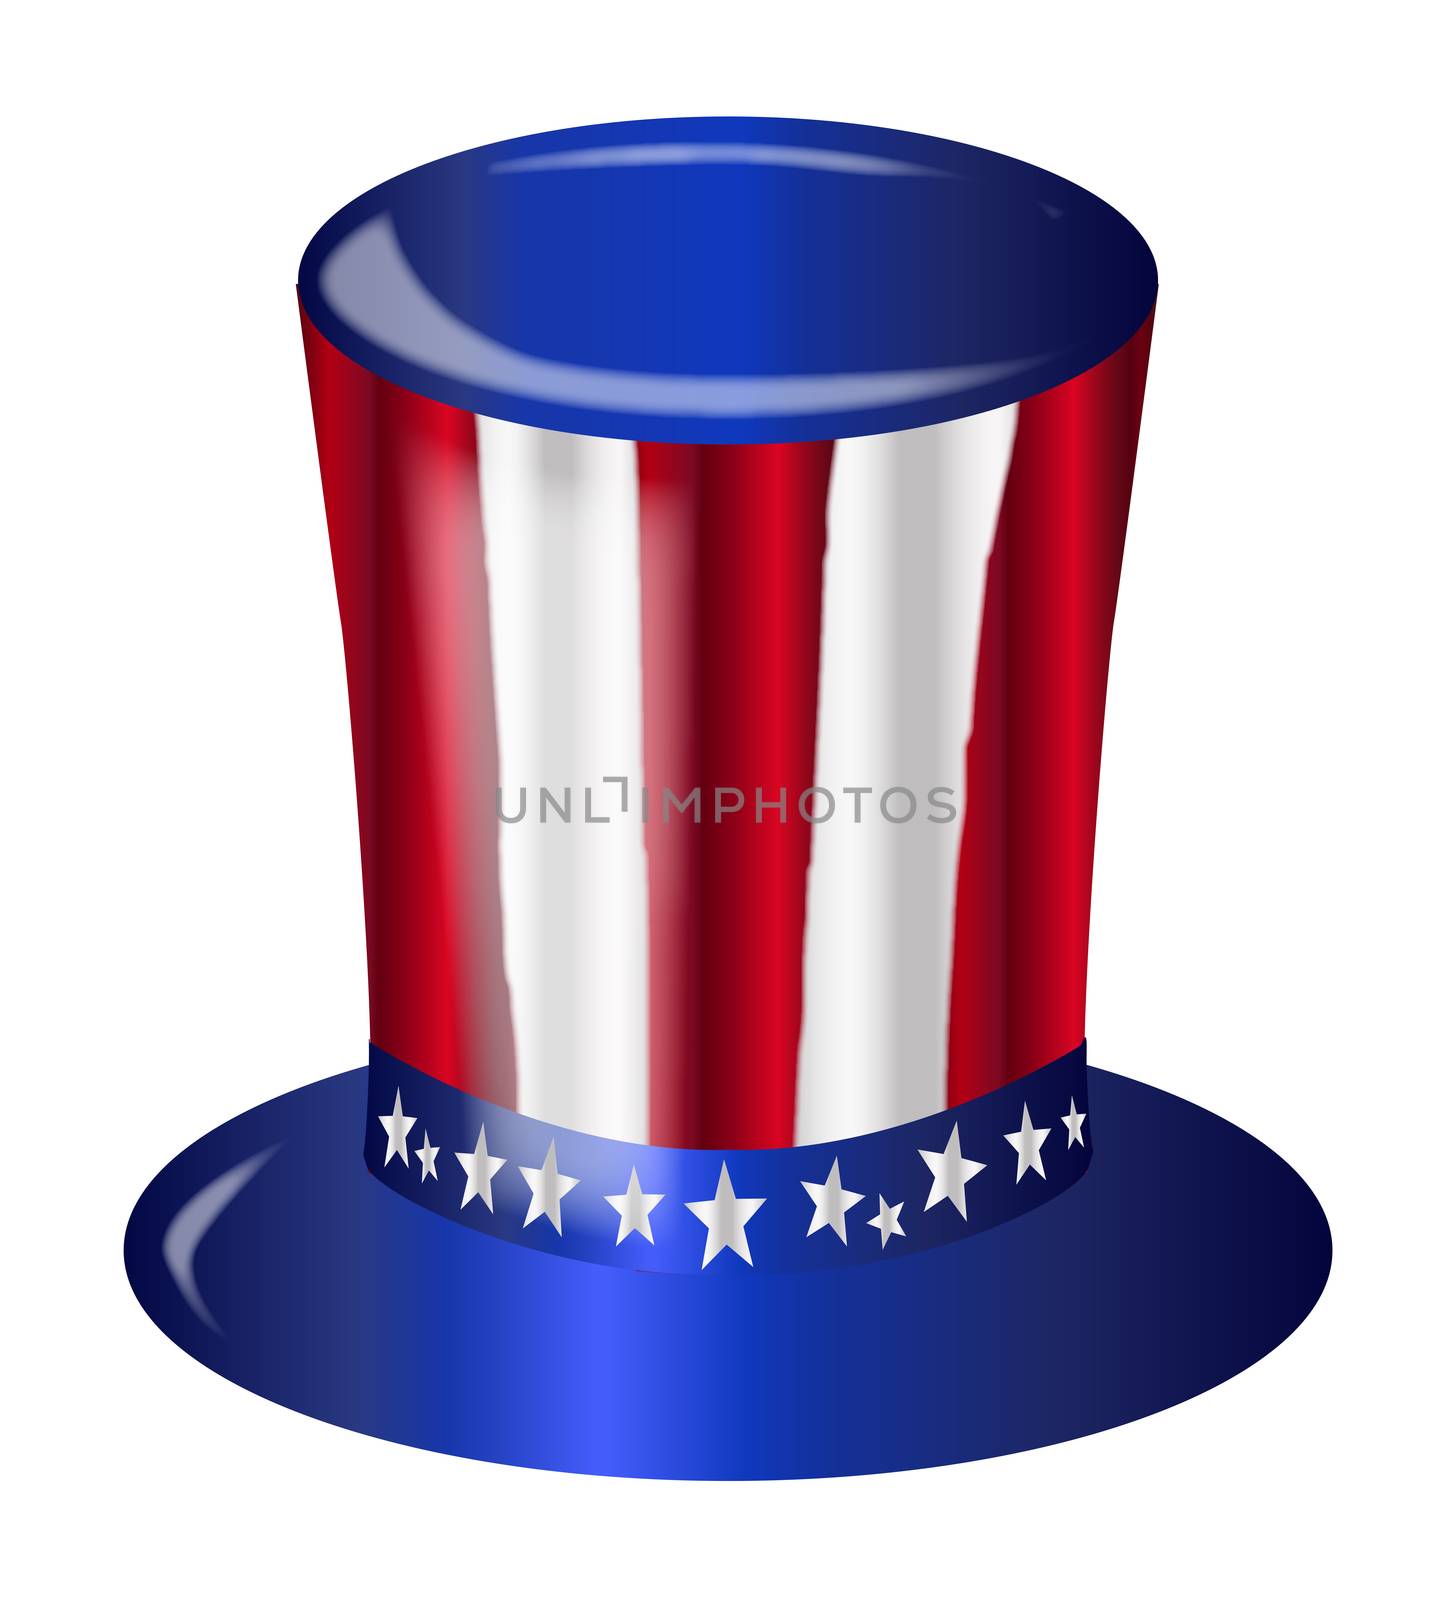 A top hat with a star spangled banner colors and stars over a white background